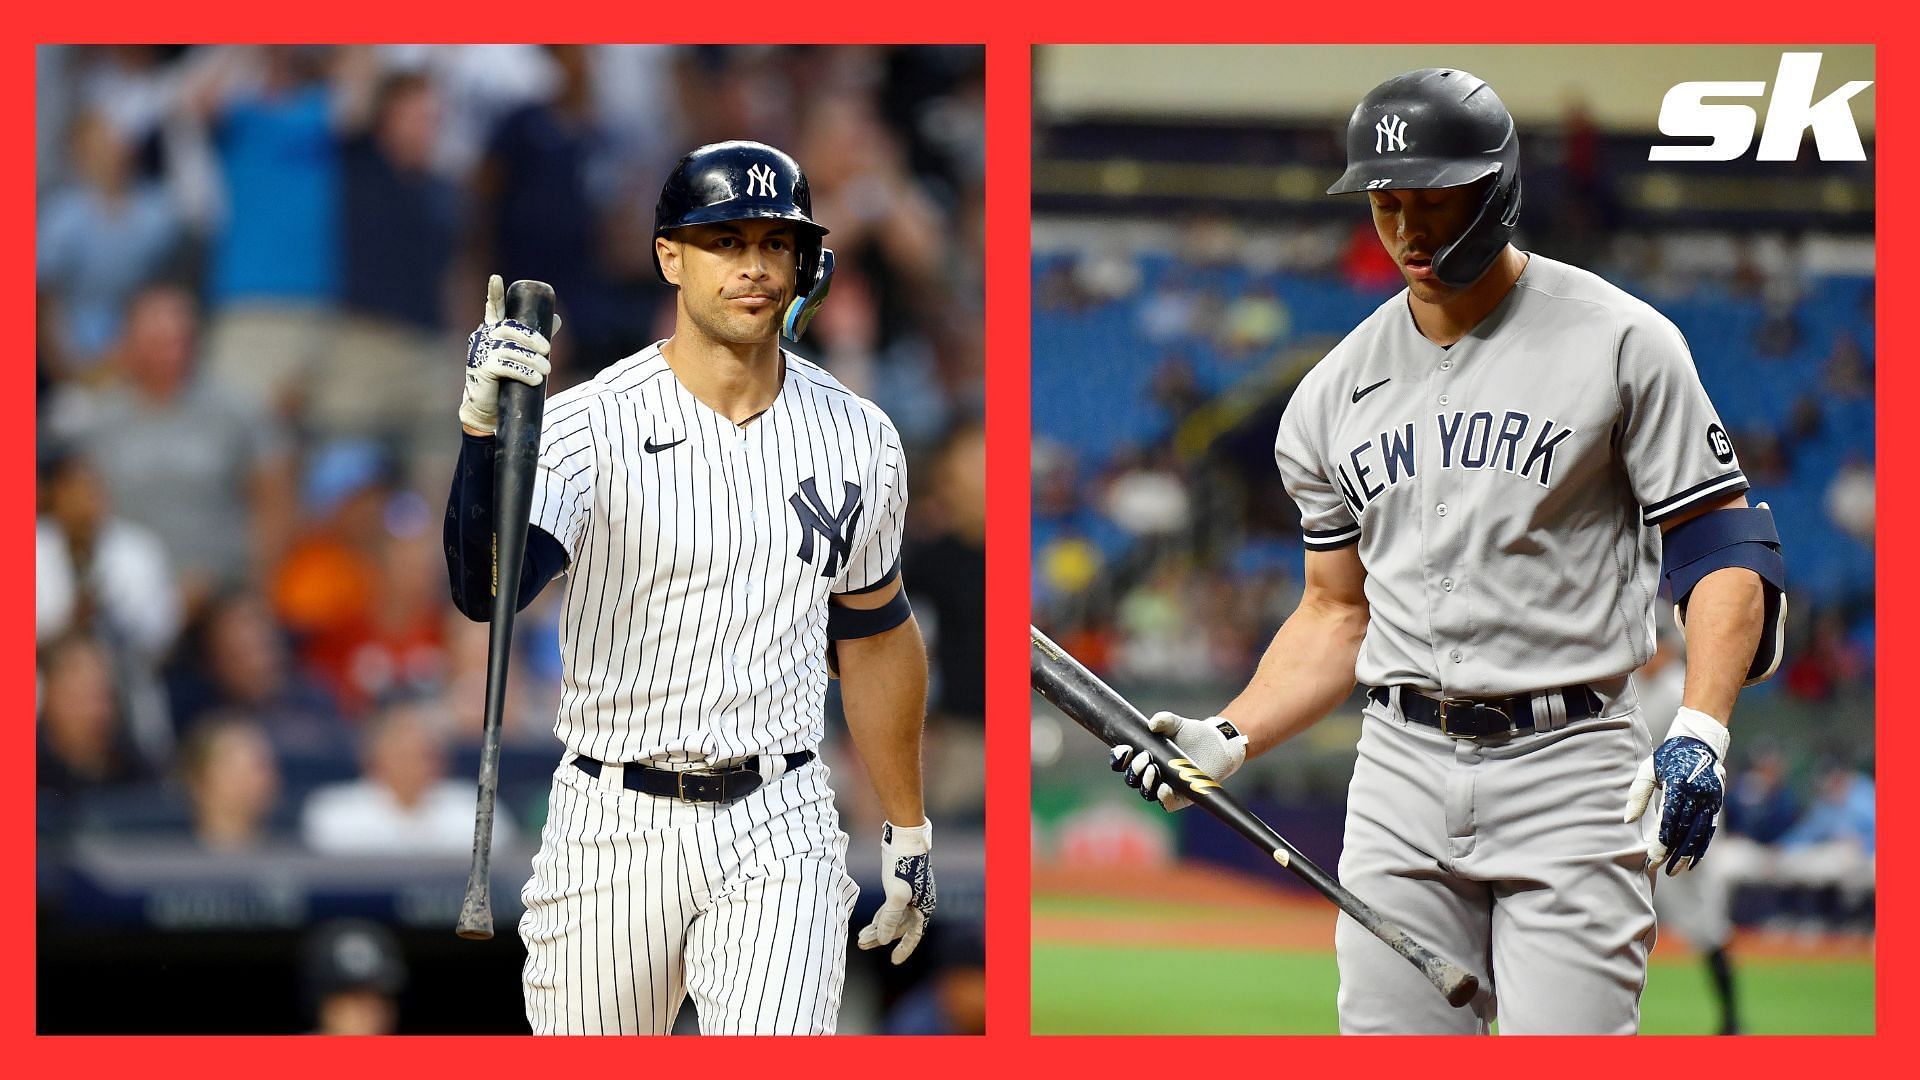 How should the Yankees use Giancarlo Stanton moving forward